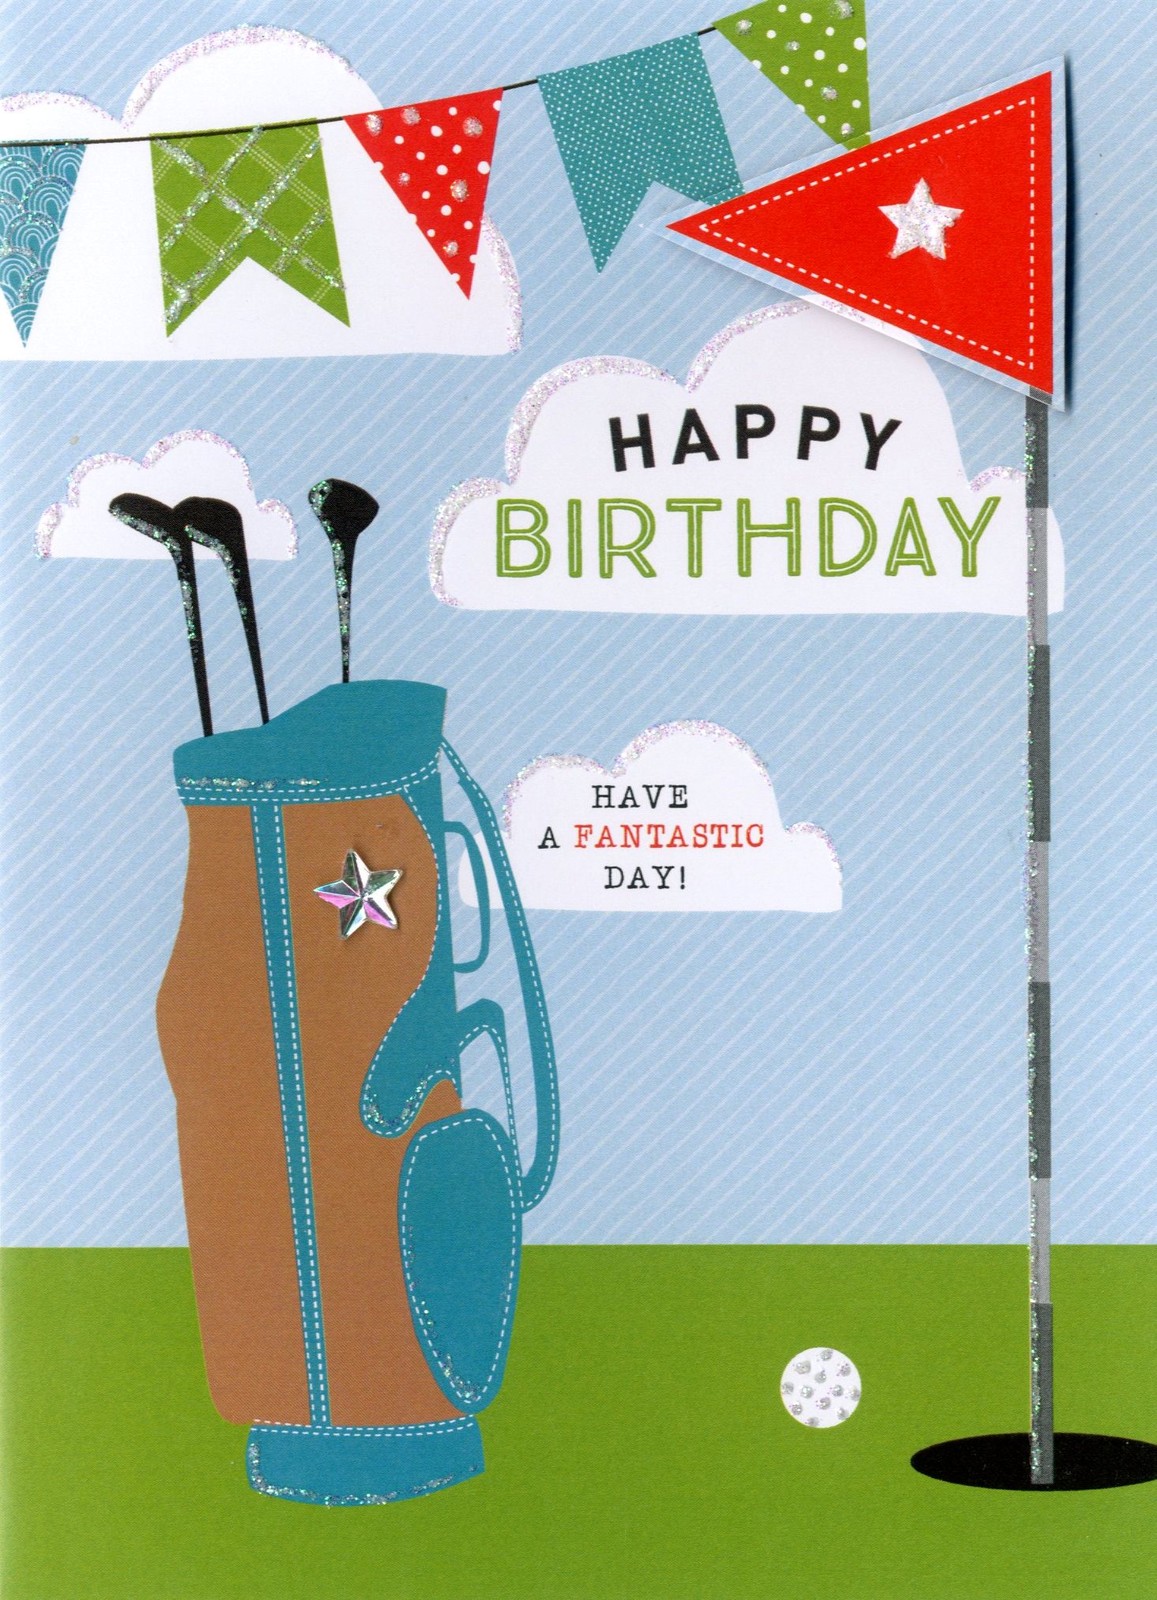 Happy Birthday Images With Golf💐 — Free Happy Bday Pictures And Photos